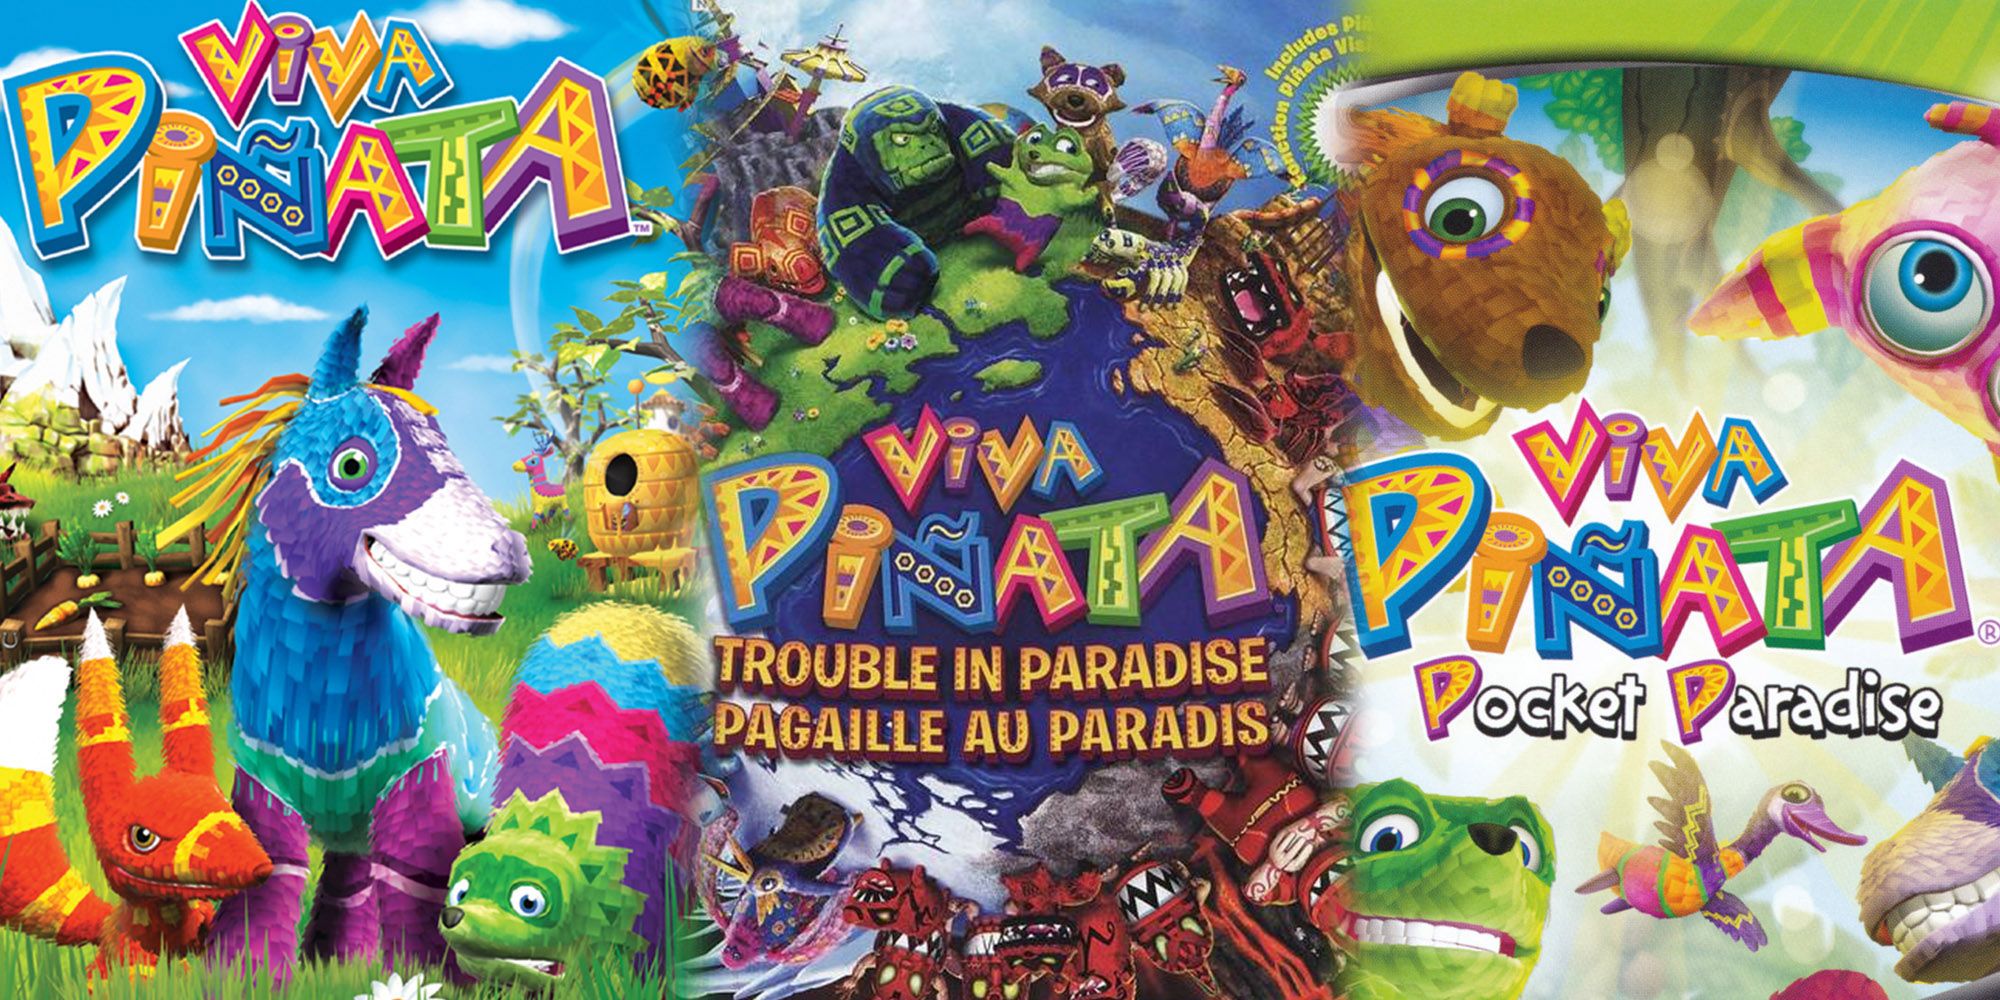 All Three Viva Pinata Games Mentioned With Cover Arts And Game TItles